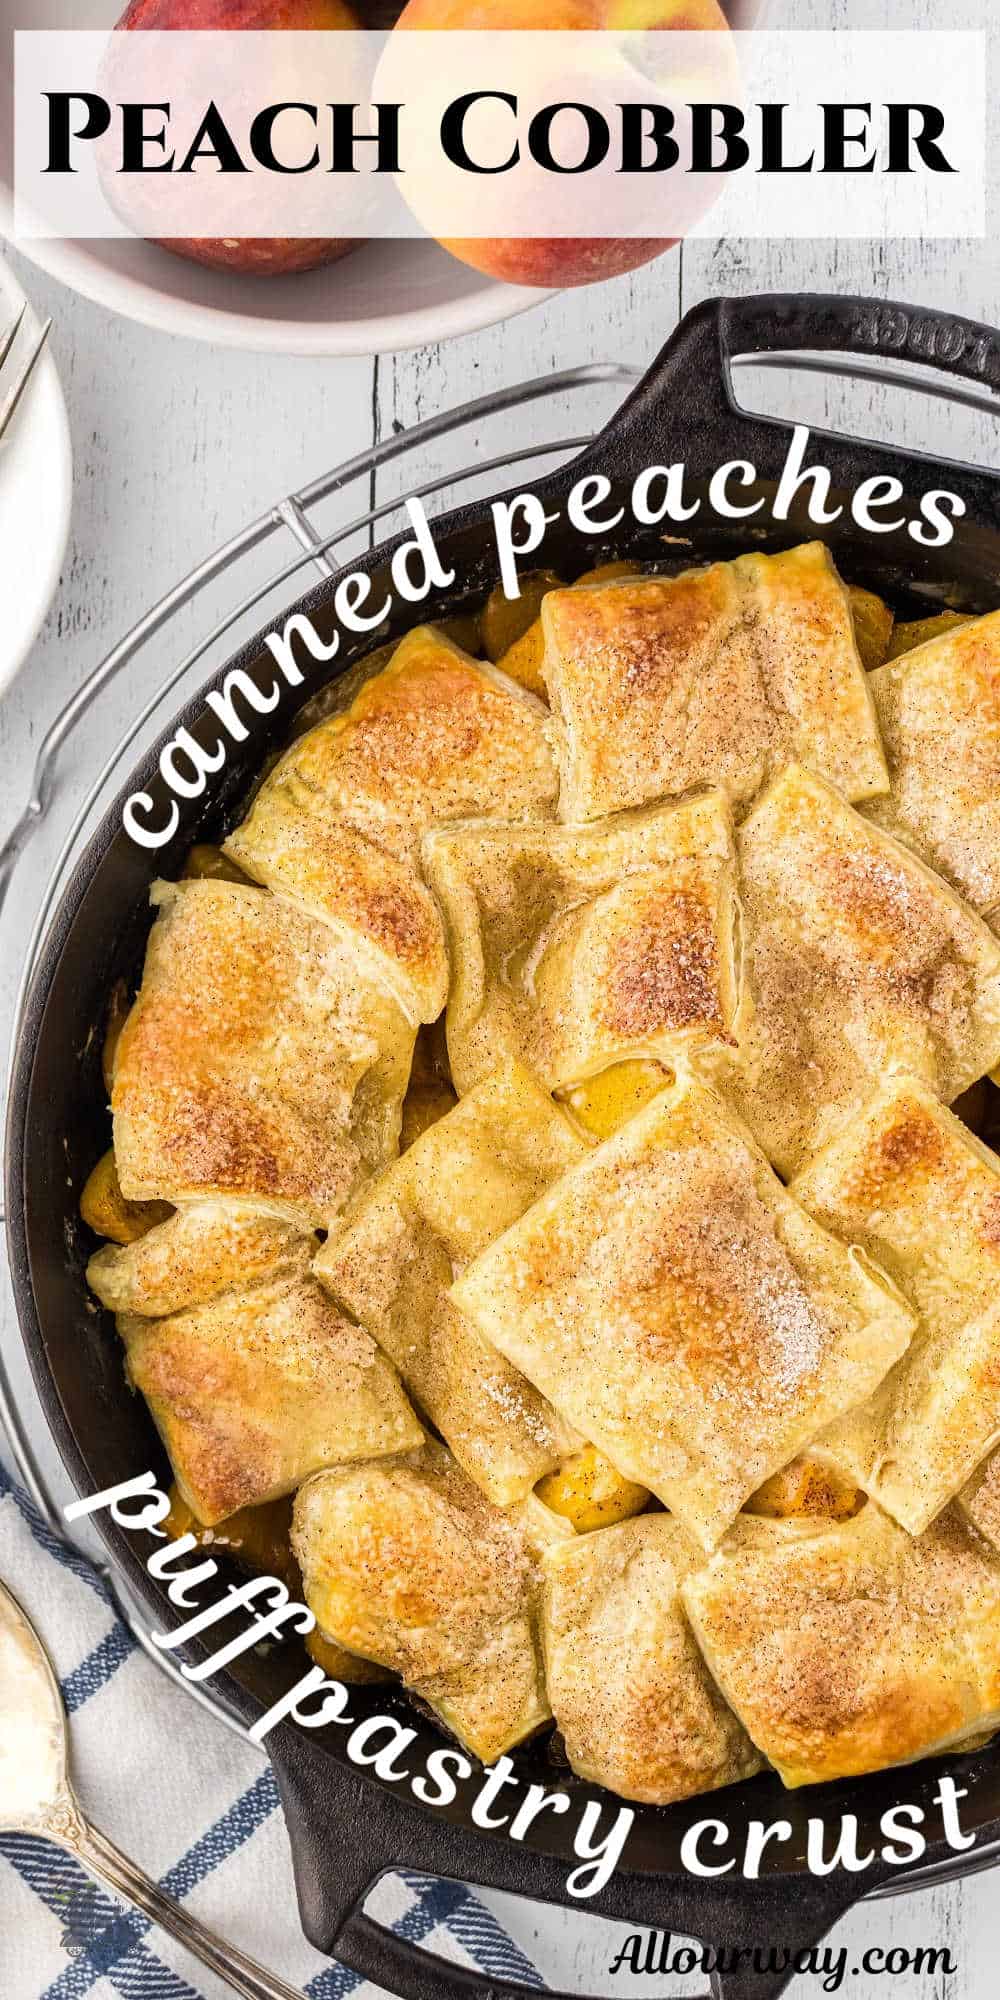 If you want a show-stopping dessert without the effort, this canned peach cobbler is for you. The combination of luscious peaches and delicate puff pastry will leave family and guests begging for more. This quick and easy dessert is one that everyone loves.